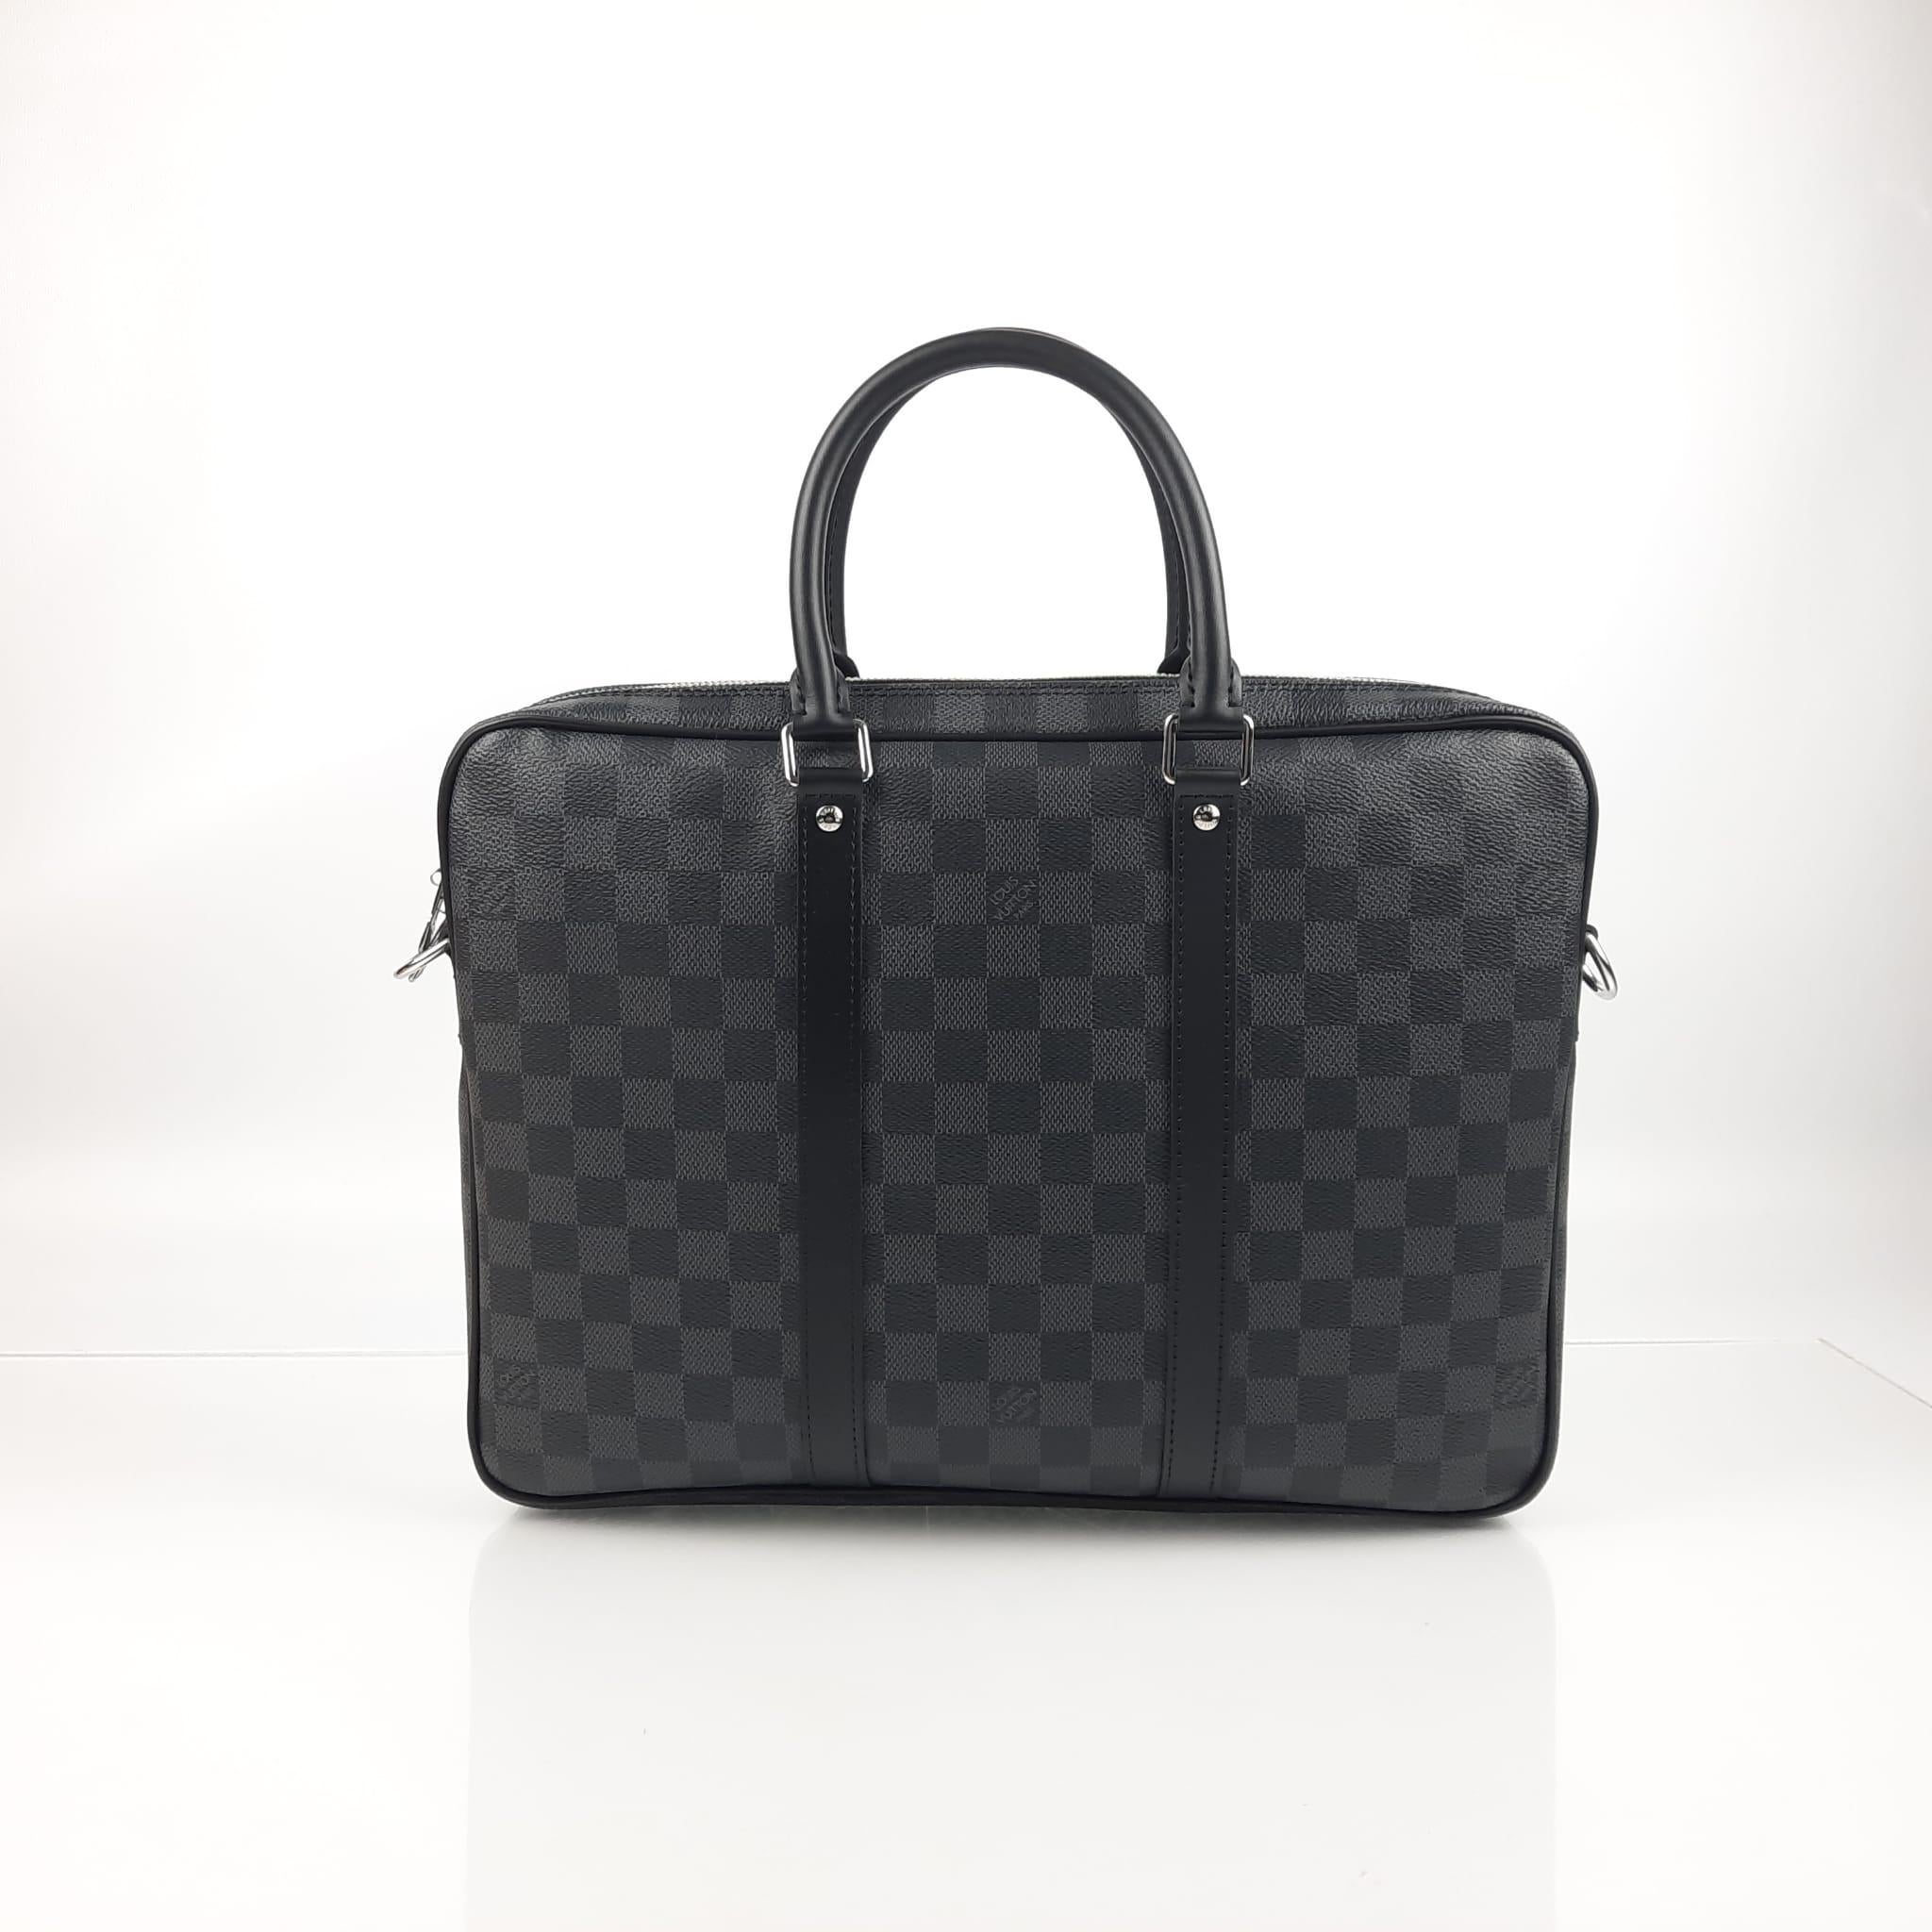 The Porte-Documents Voyage PM looks effortlessly stylish in masculine Damier Graphite canvas. With smooth leather trimmings and a spacious interior, it combines luxury and practicality.